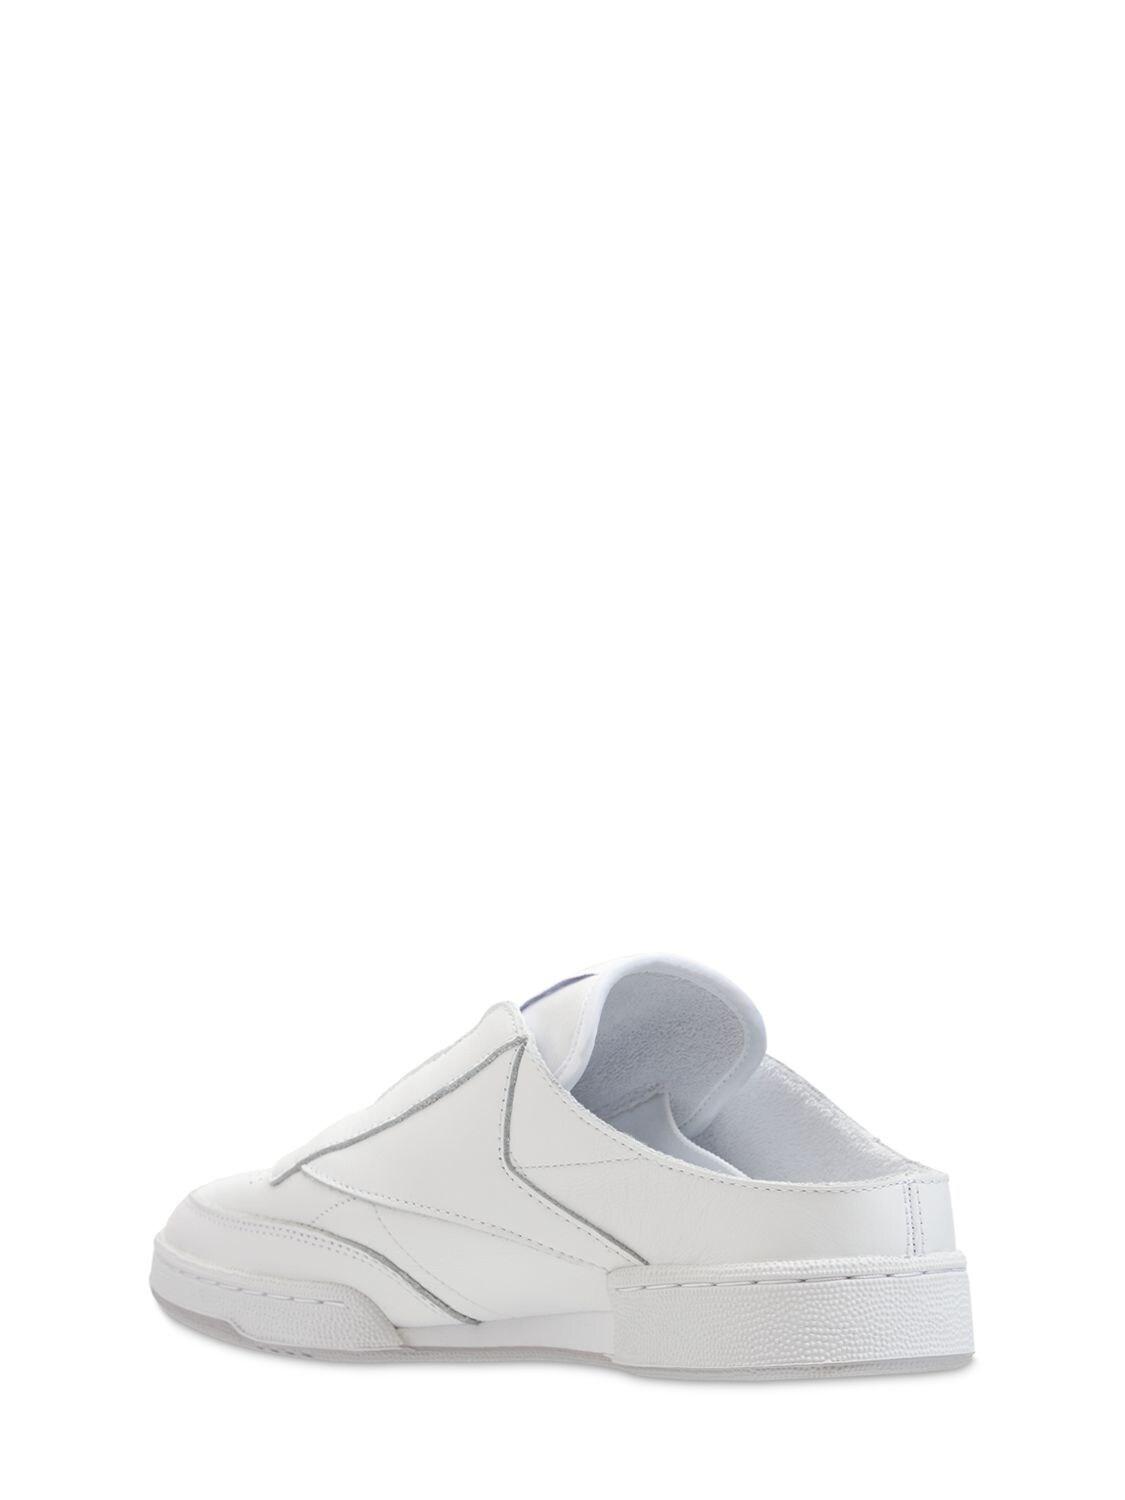 Reebok Leather Beams Club C Laceless Mule Sneakers in White for Men | Lyst